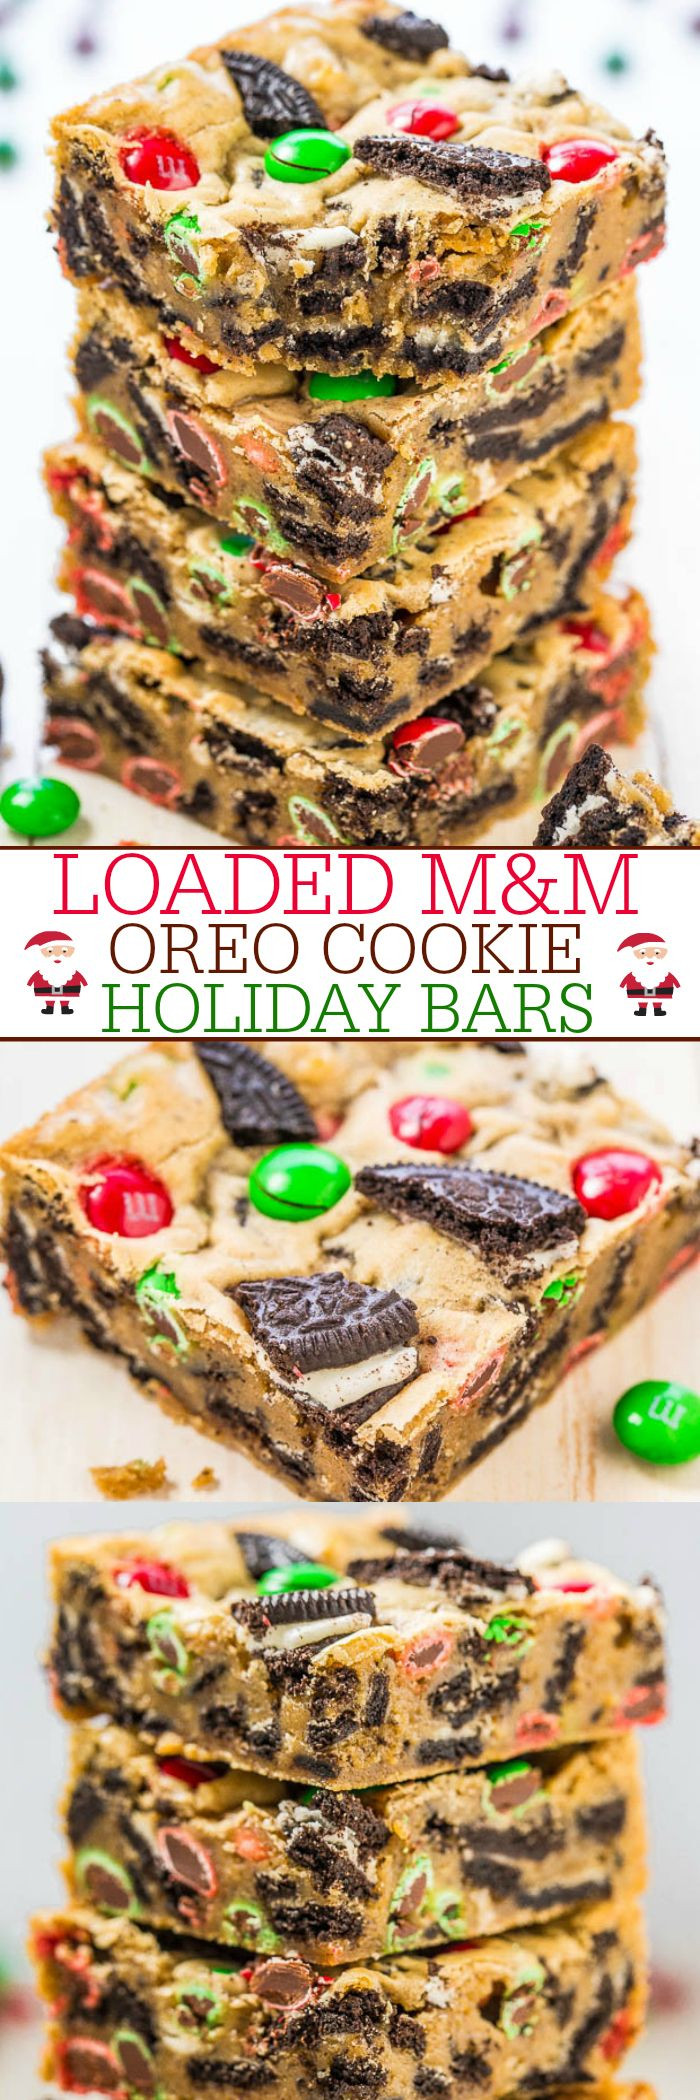 M&amp;M Christmas Cookies Recipe
 Loaded M&M Oreo Cookie Holiday Bars Recipe